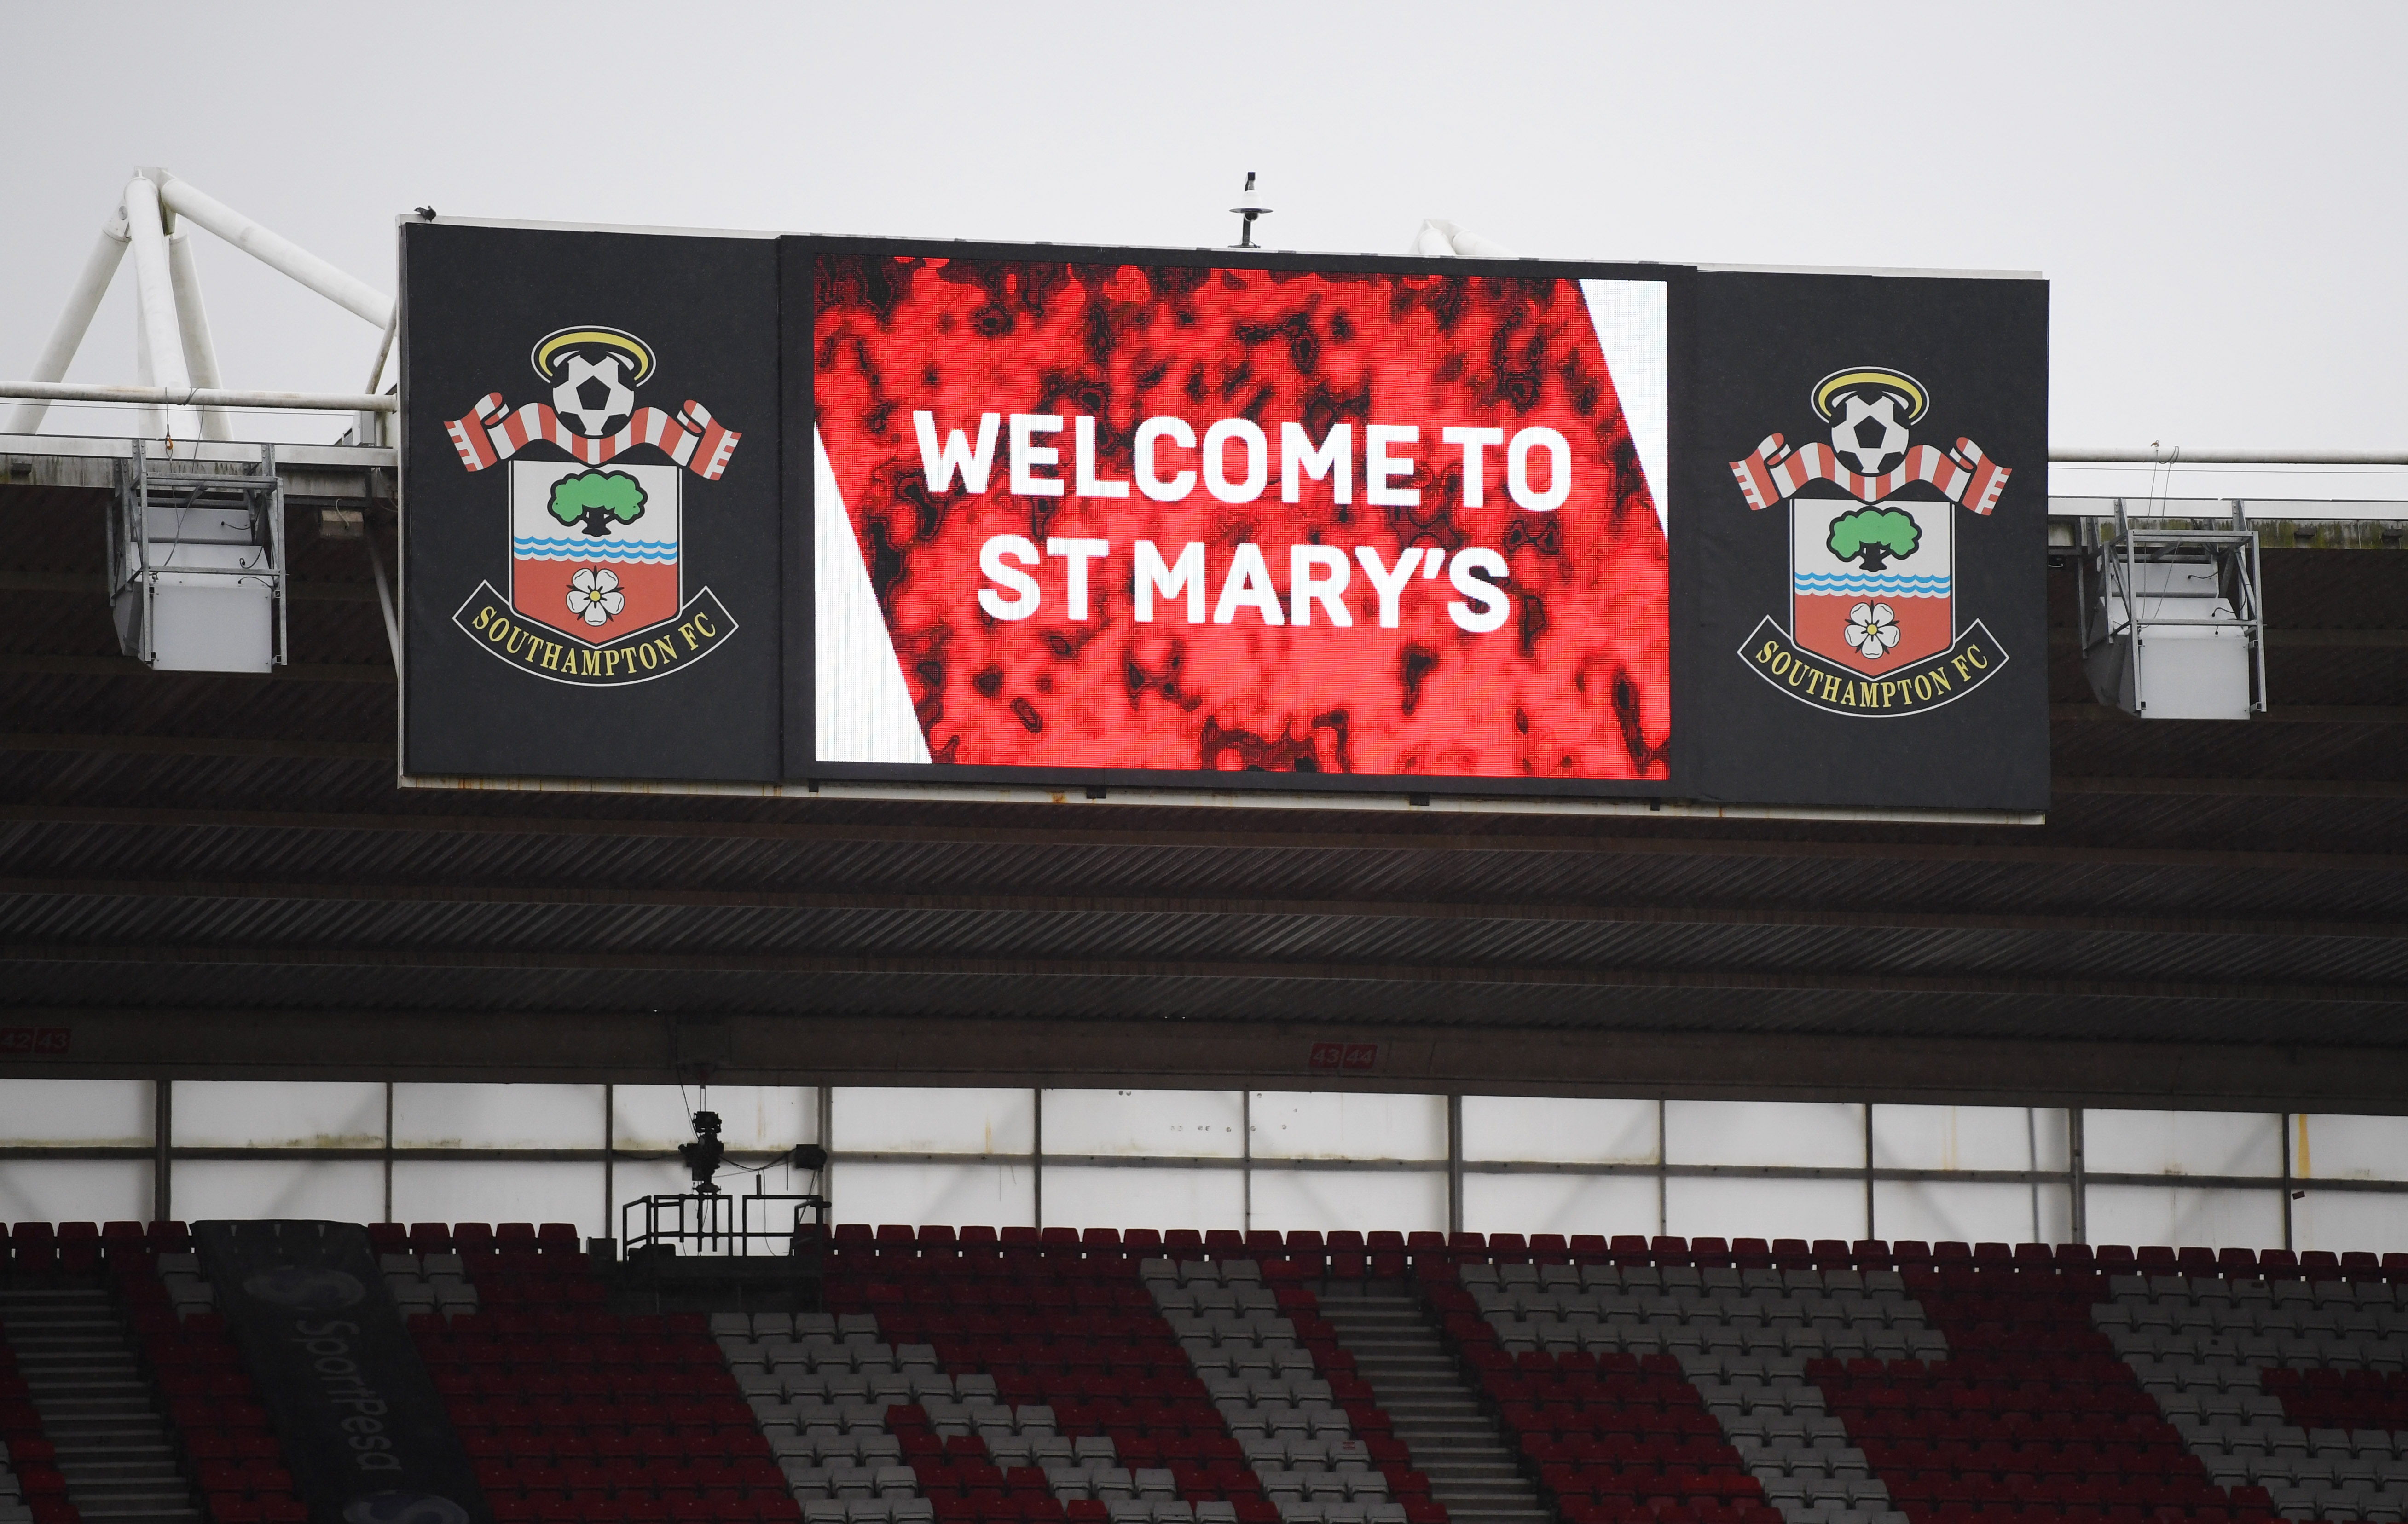 SOUTHAMPTON, ENGLAND - JANUARY 21:  The scoreboard is seen prior to the Premier League match between Southampton and Tottenham Hotspur at St Mary's Stadium on January 21, 2018 in Southampton, England.  (Photo by Mike Hewitt/Getty Images)